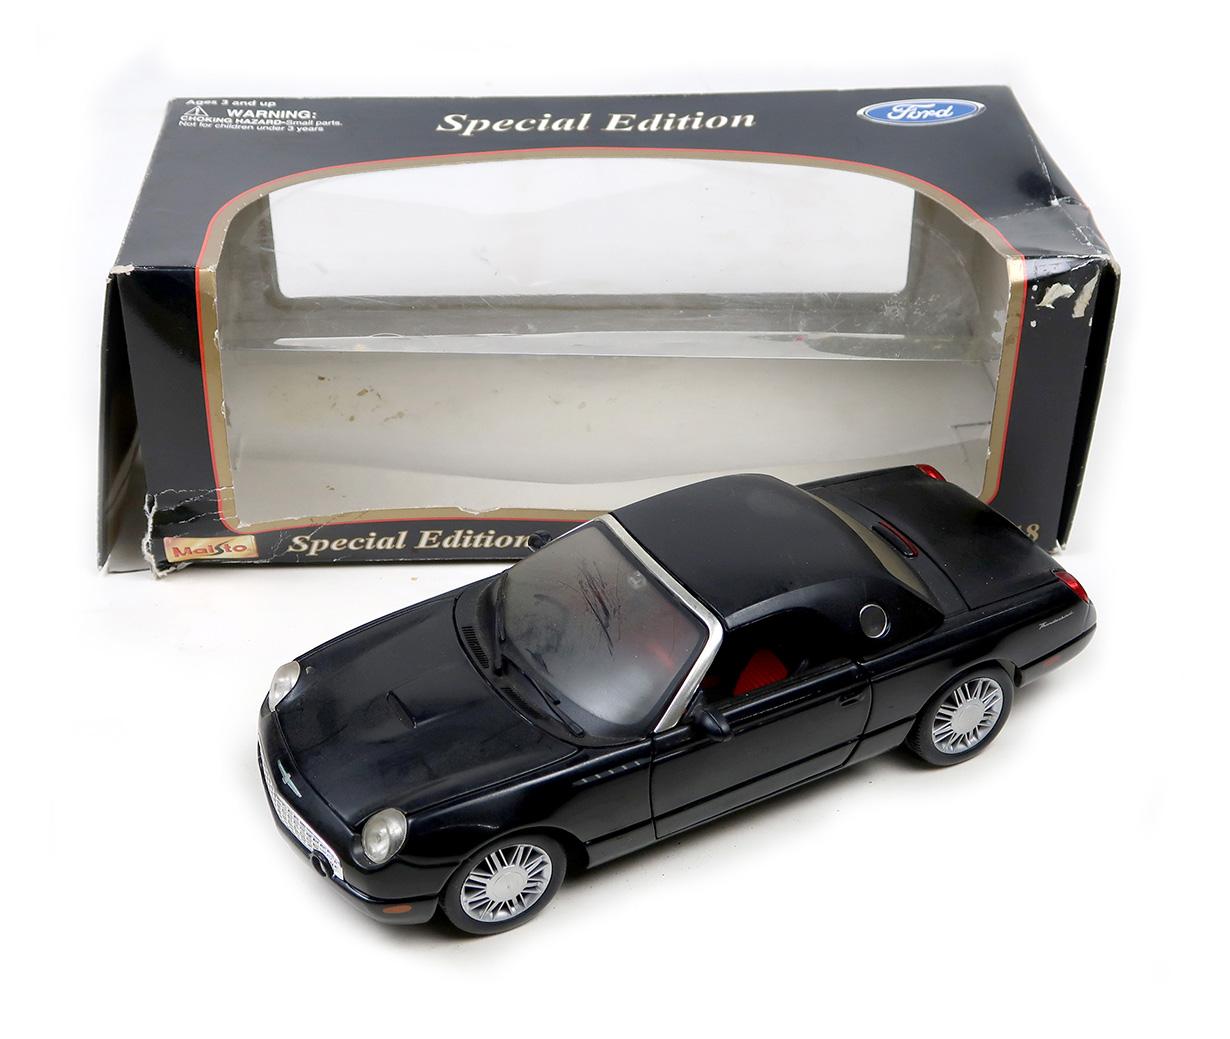 Toy Scale Models (3), Jada Toys 1967 Shelby GT-5000KR, Maisto 2002 Ford Thu